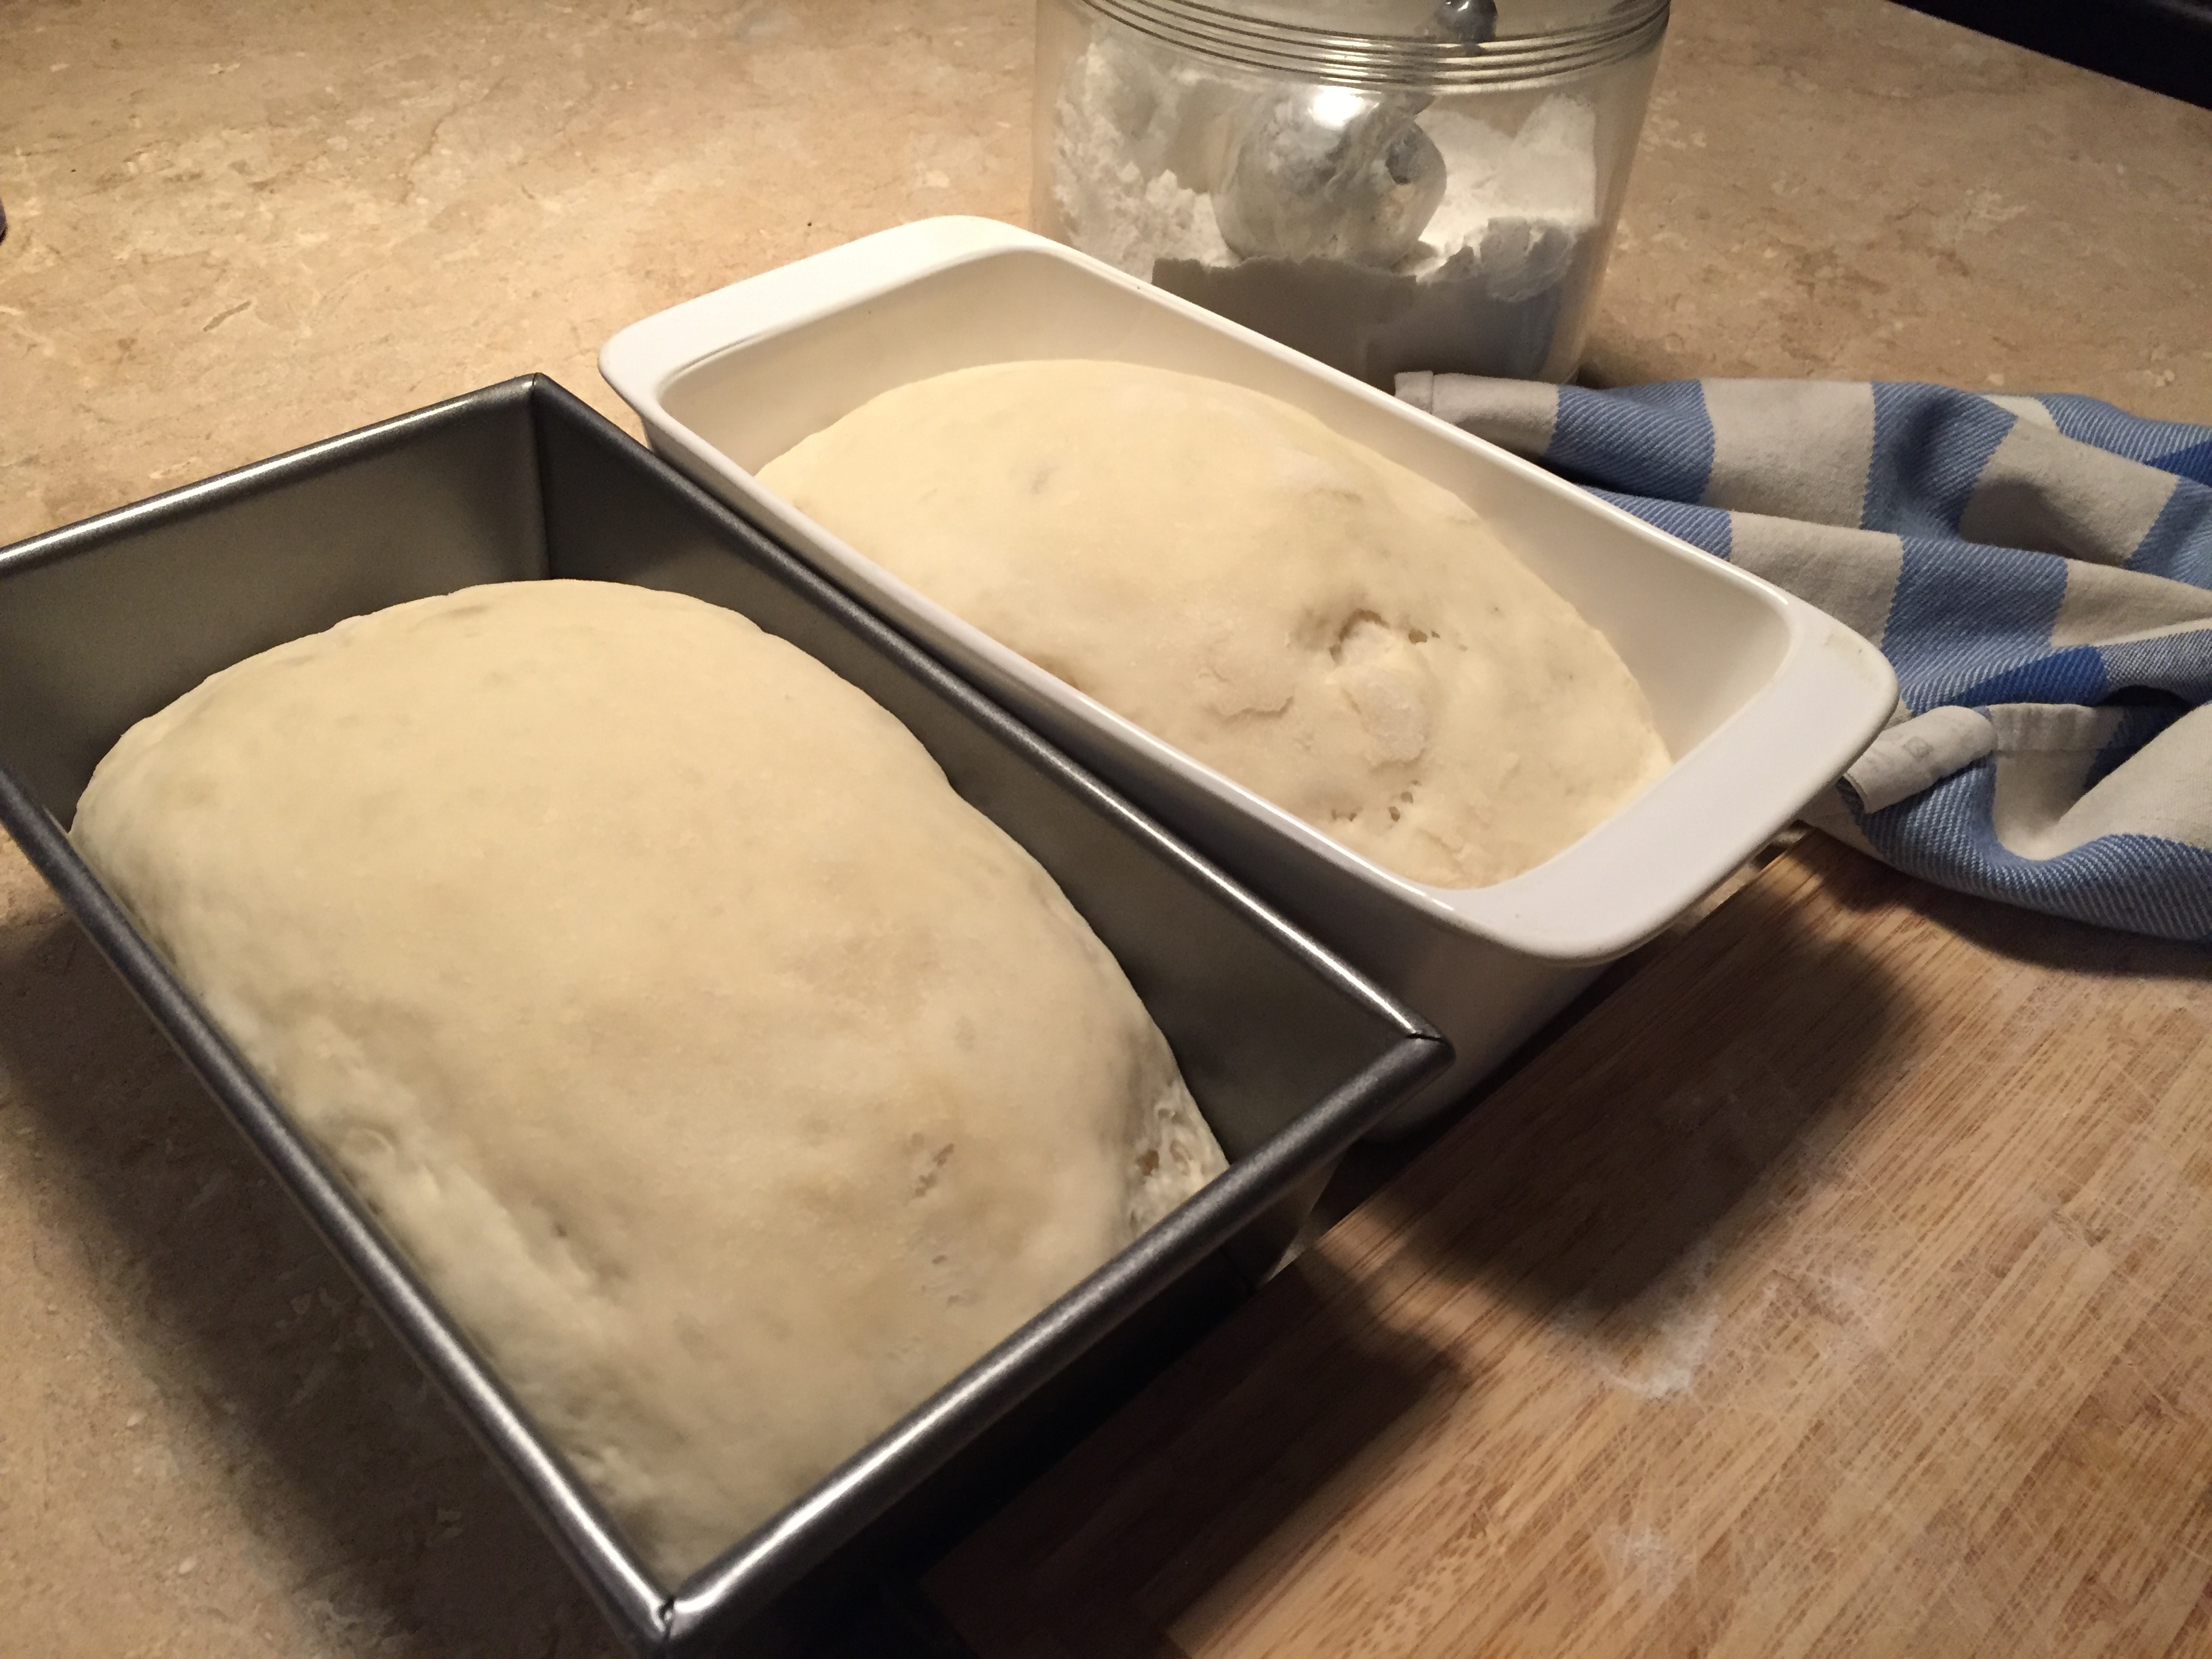 I made two loaves to proof